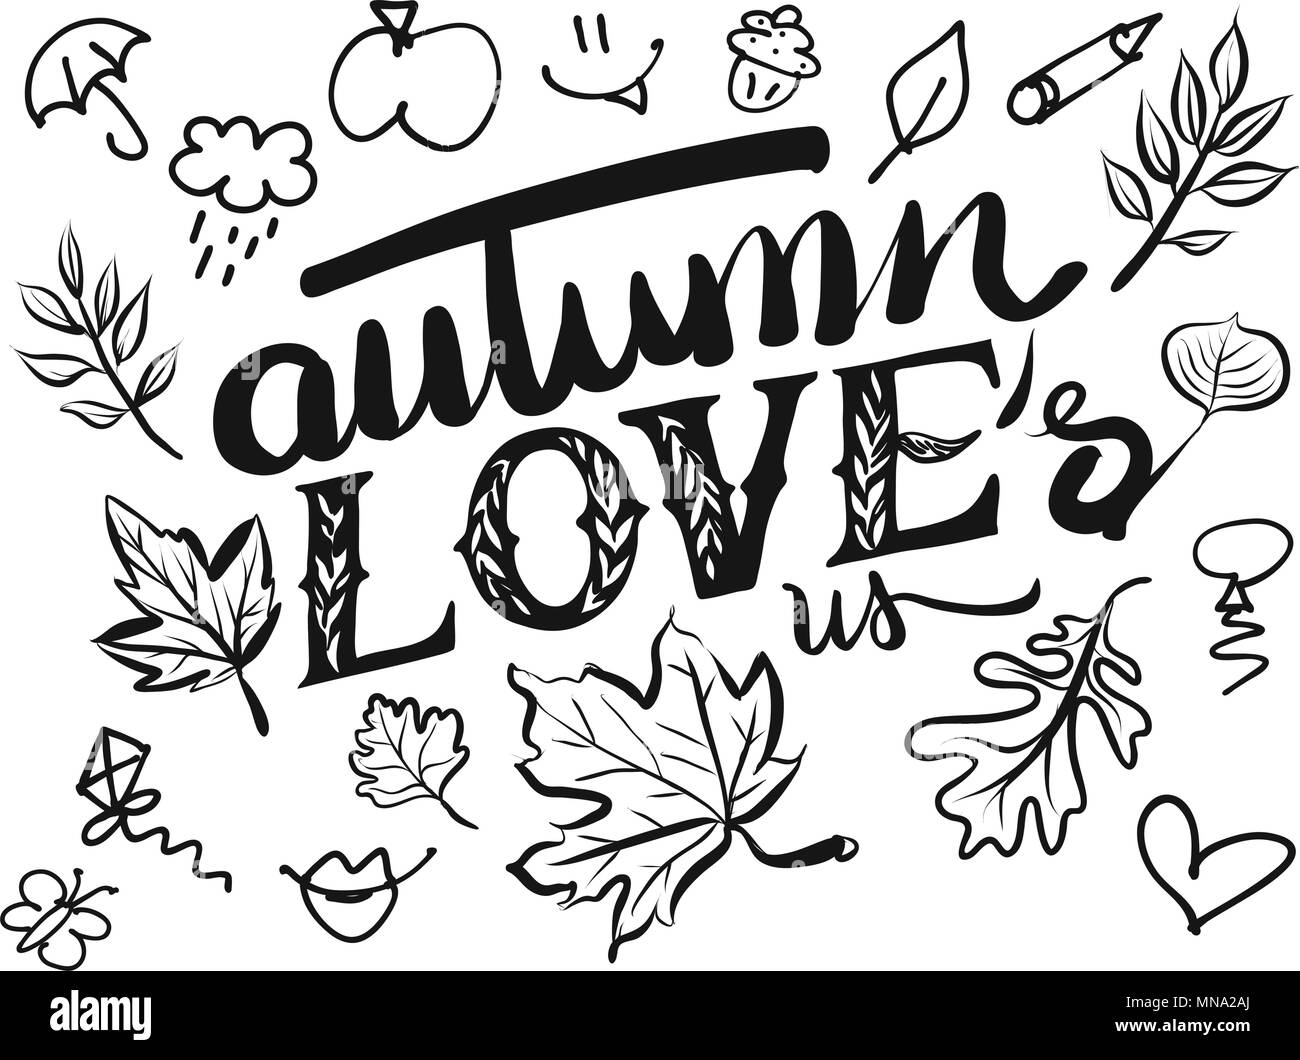 Autumn Loves us Typo and Icons, Hand drawn Vector Calligraphy Greeting Card Concept Stock Vector